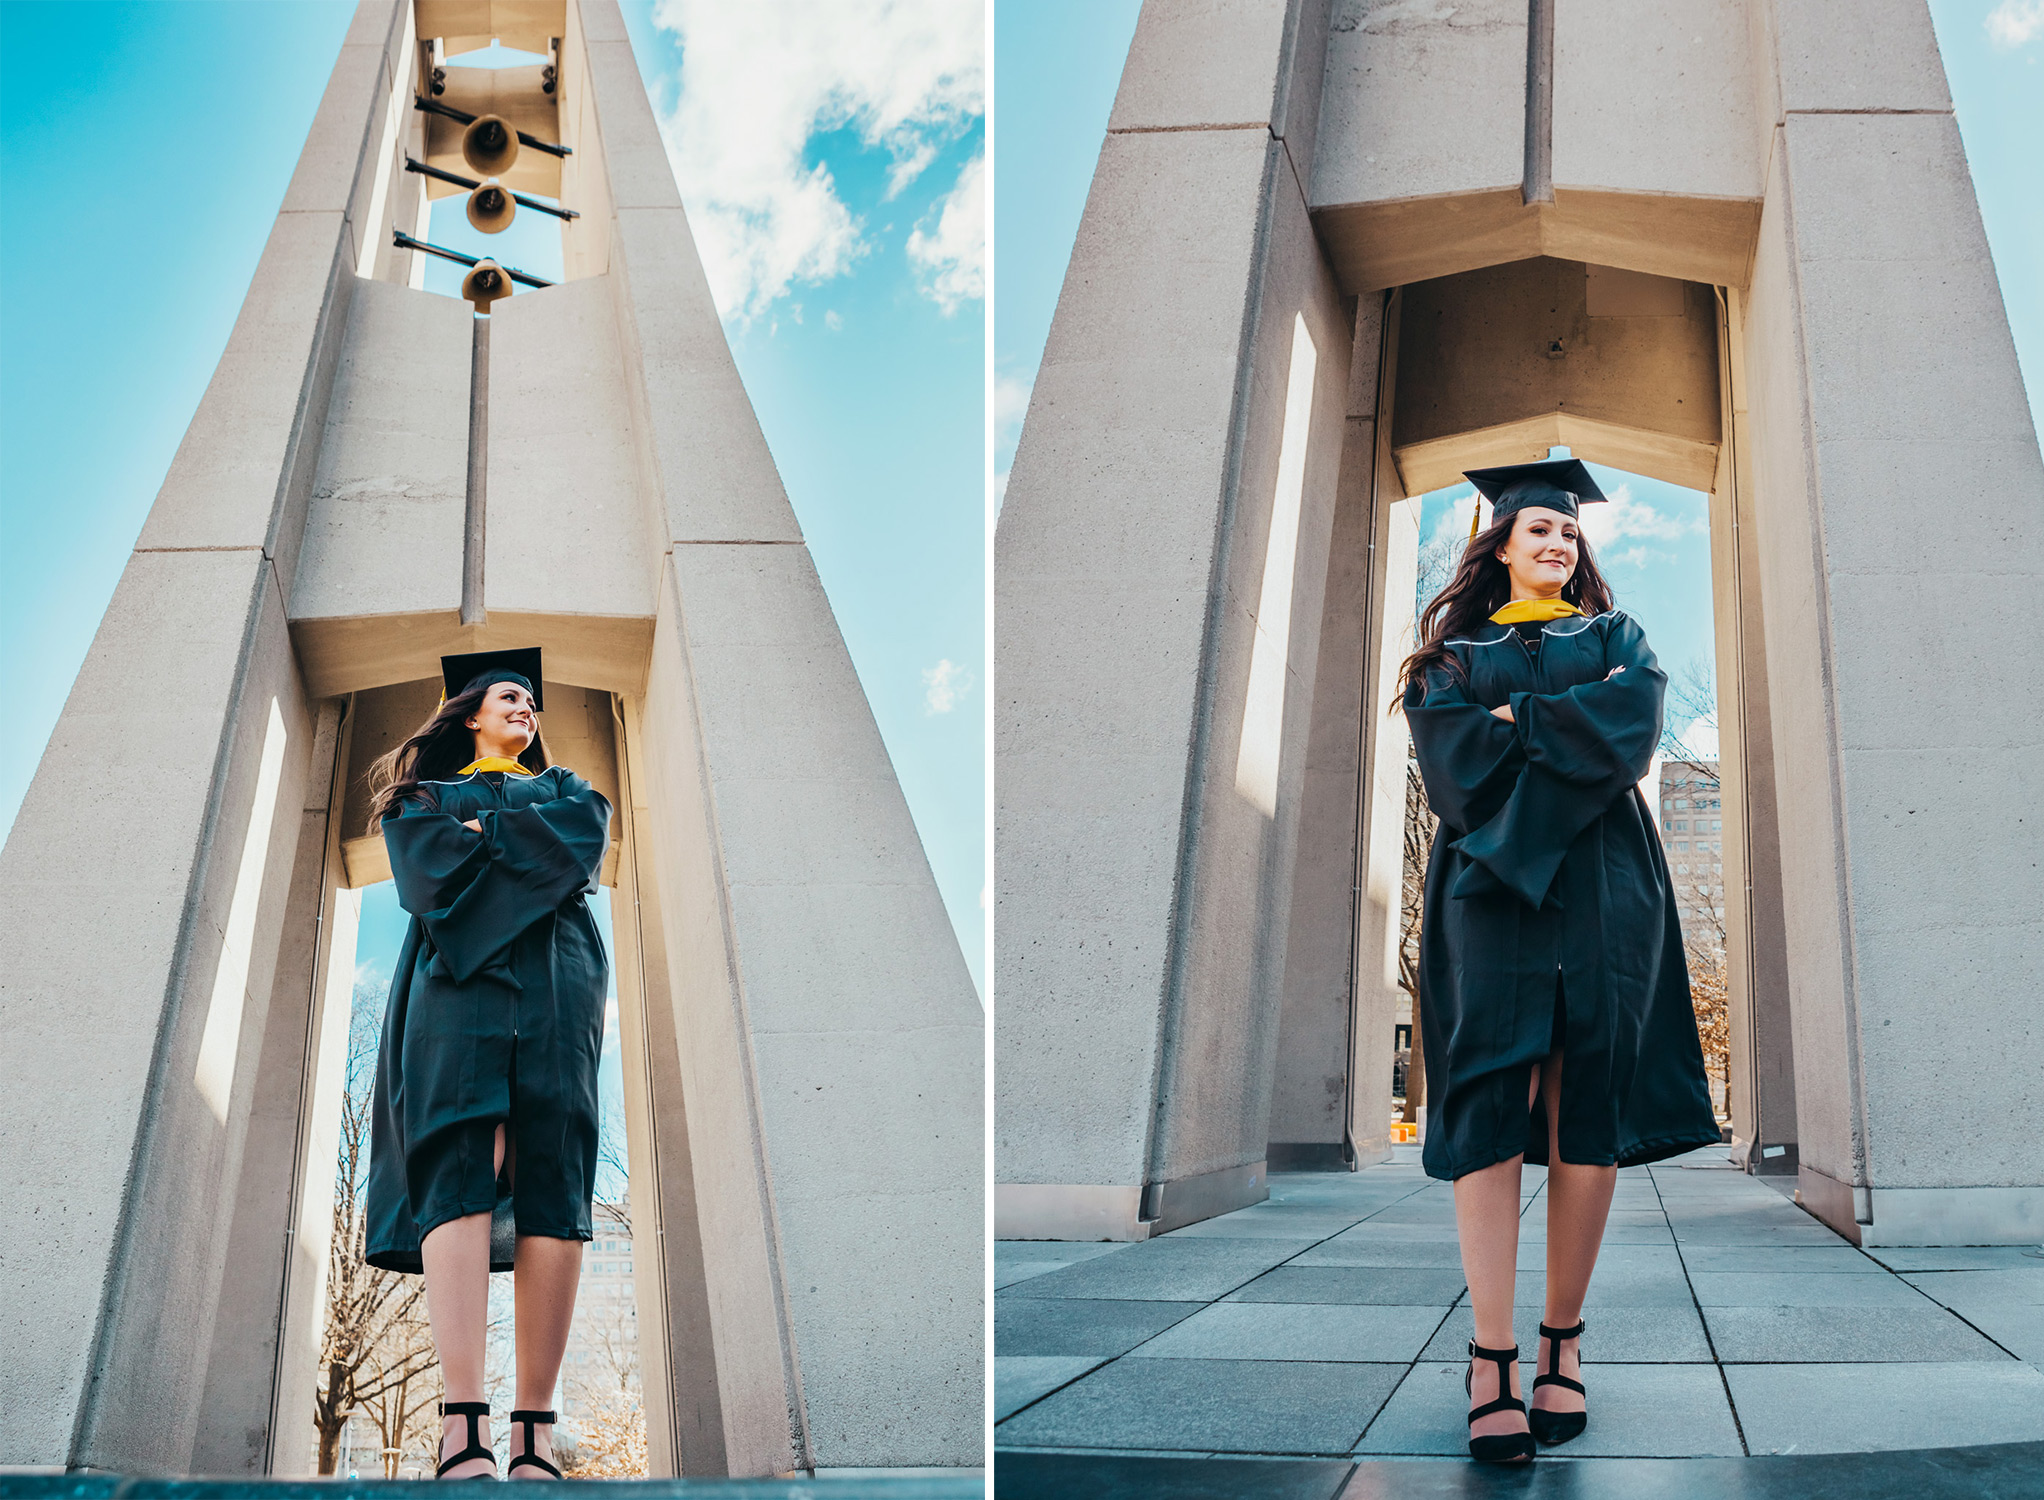 A young woman in graduation regalia stands in front of the bell tower on Temple University's campus.